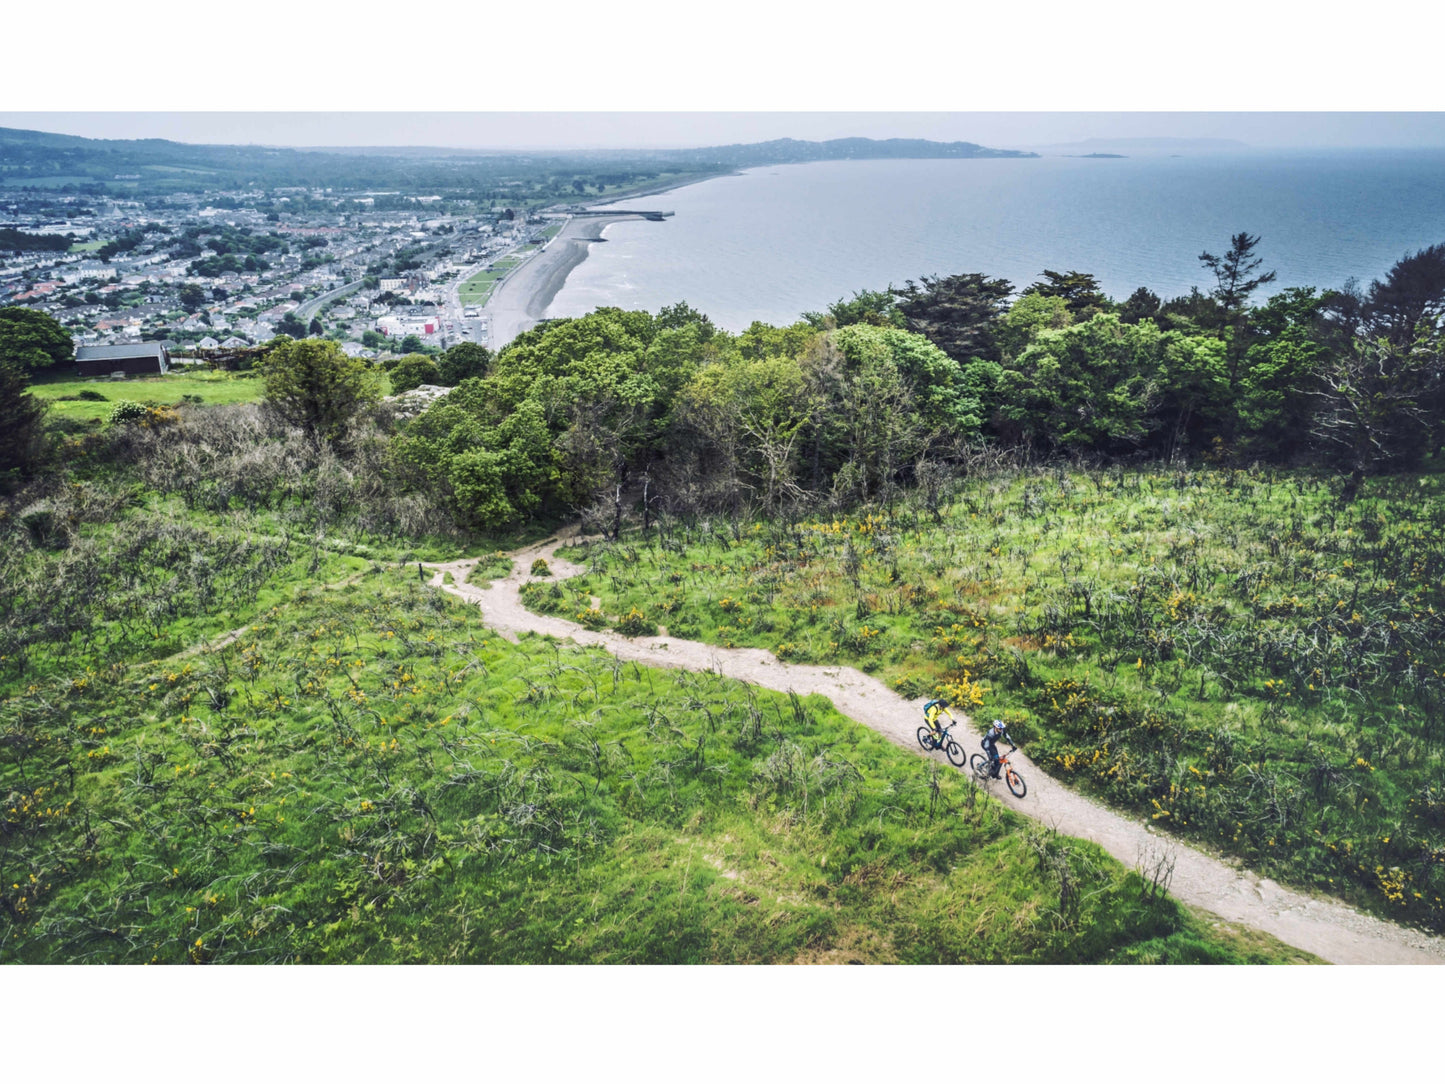 Cube Stereo Hybrid 120 PRO 625 eMTB full Suspension two people riding bike trail with ocean beach background